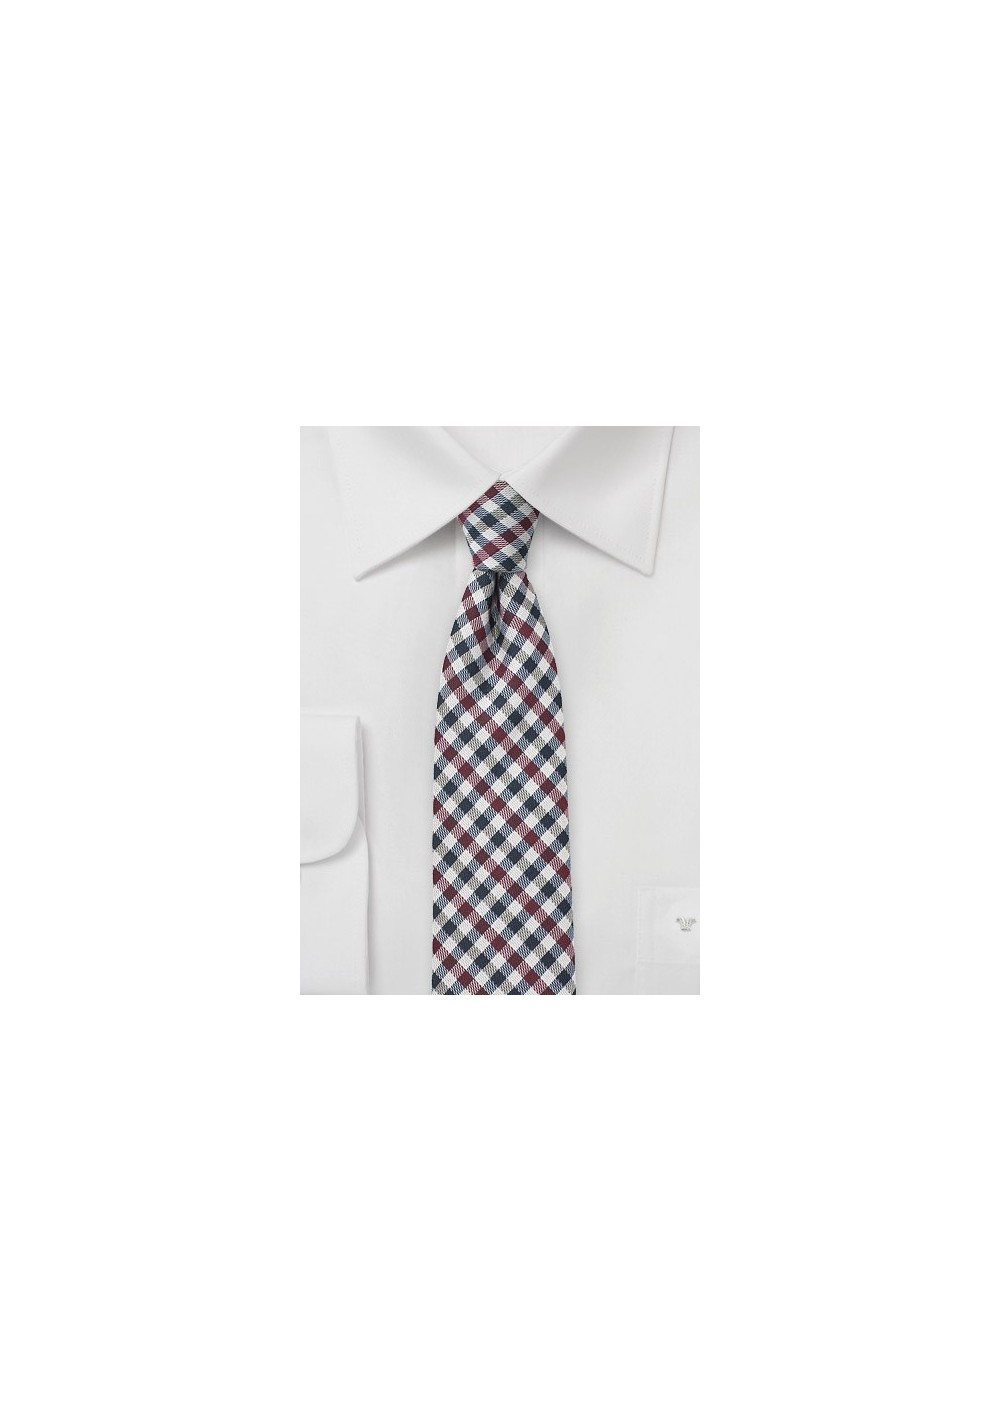 Wine Red and Navy Gingham Tie